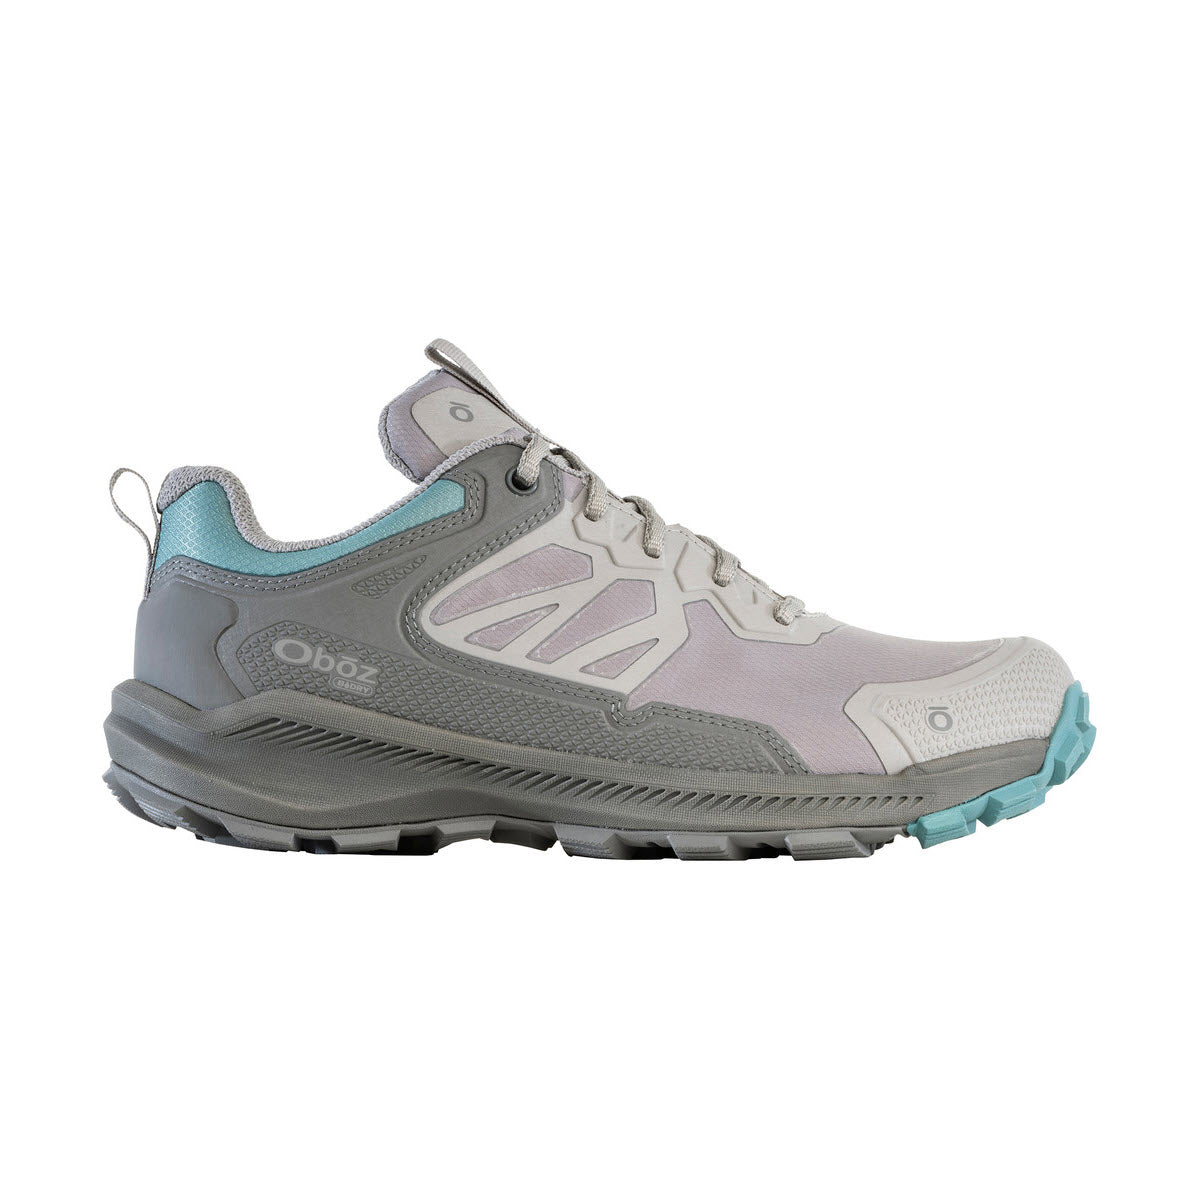 A single Oboz Katabatic Low B-DRY Island hiking shoe with the brand logo visible on the side and a B-DRY waterproof, breathable membrane.